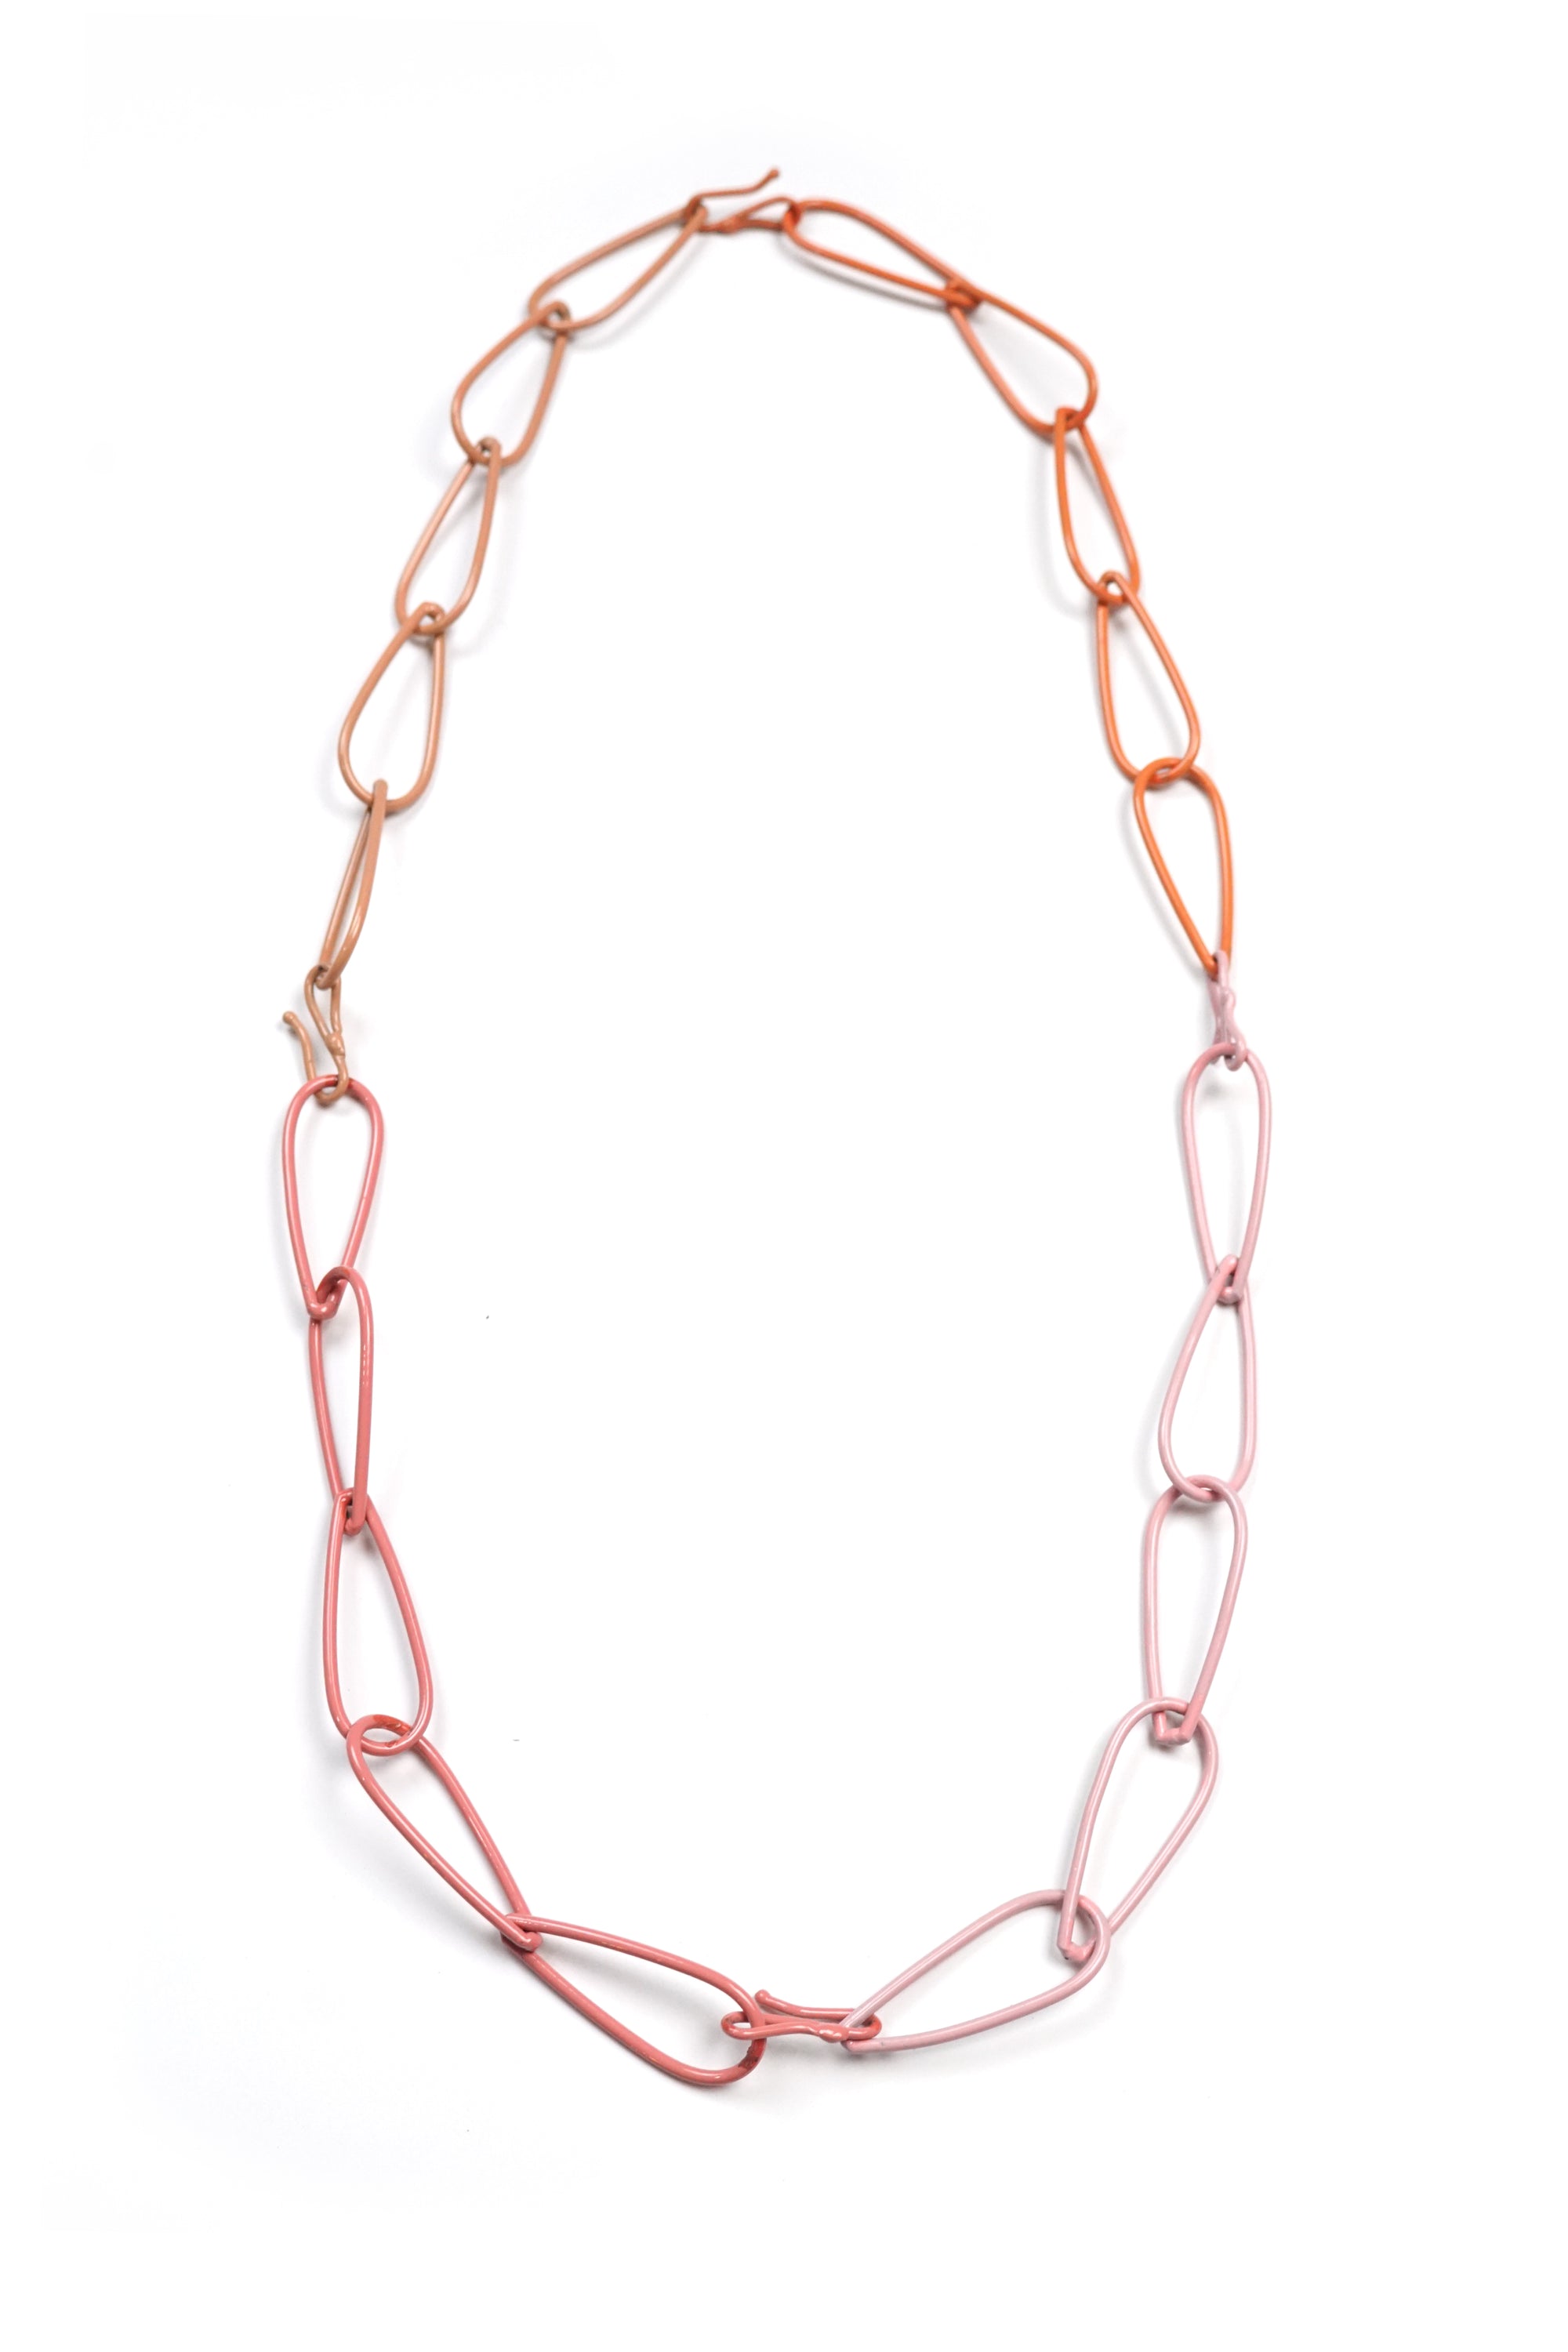 Long Modular Necklace in Dusty Rose, Desert Coral, Light Raspberry, and Bubble Gum